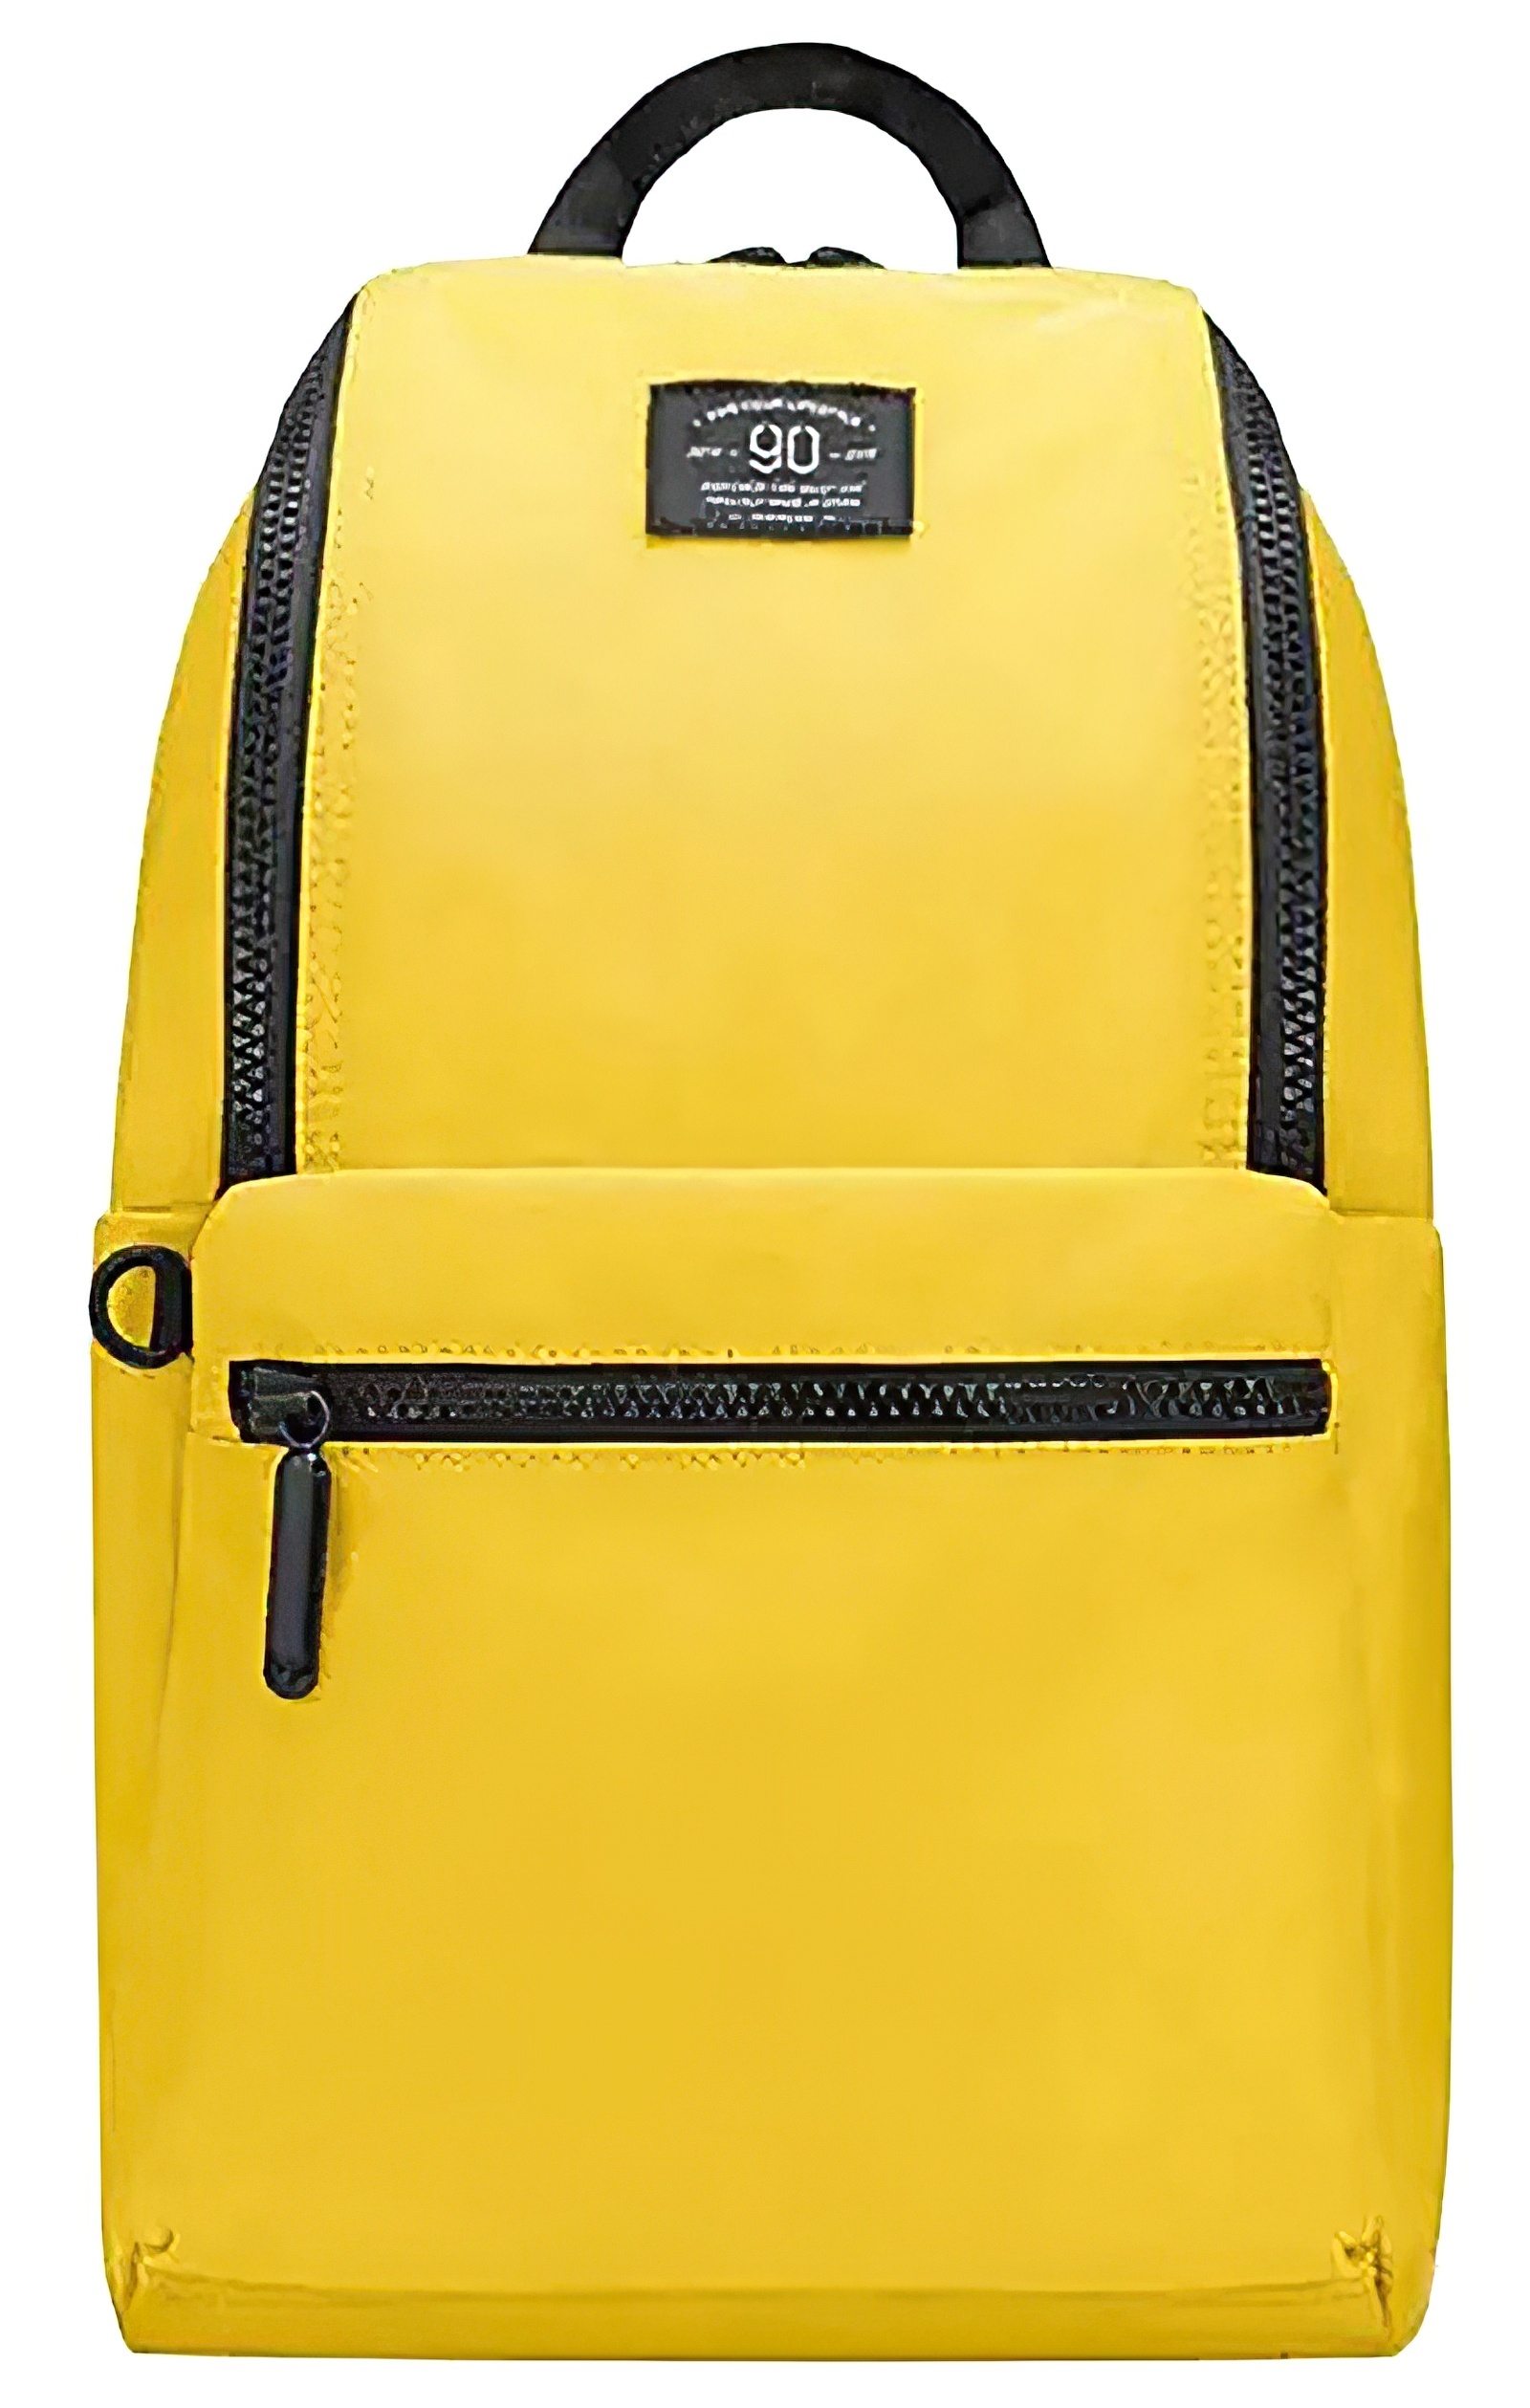 Xiaomi 90 Points Pro Leisure Travel Backpack 18L Yellow КАРКАМ